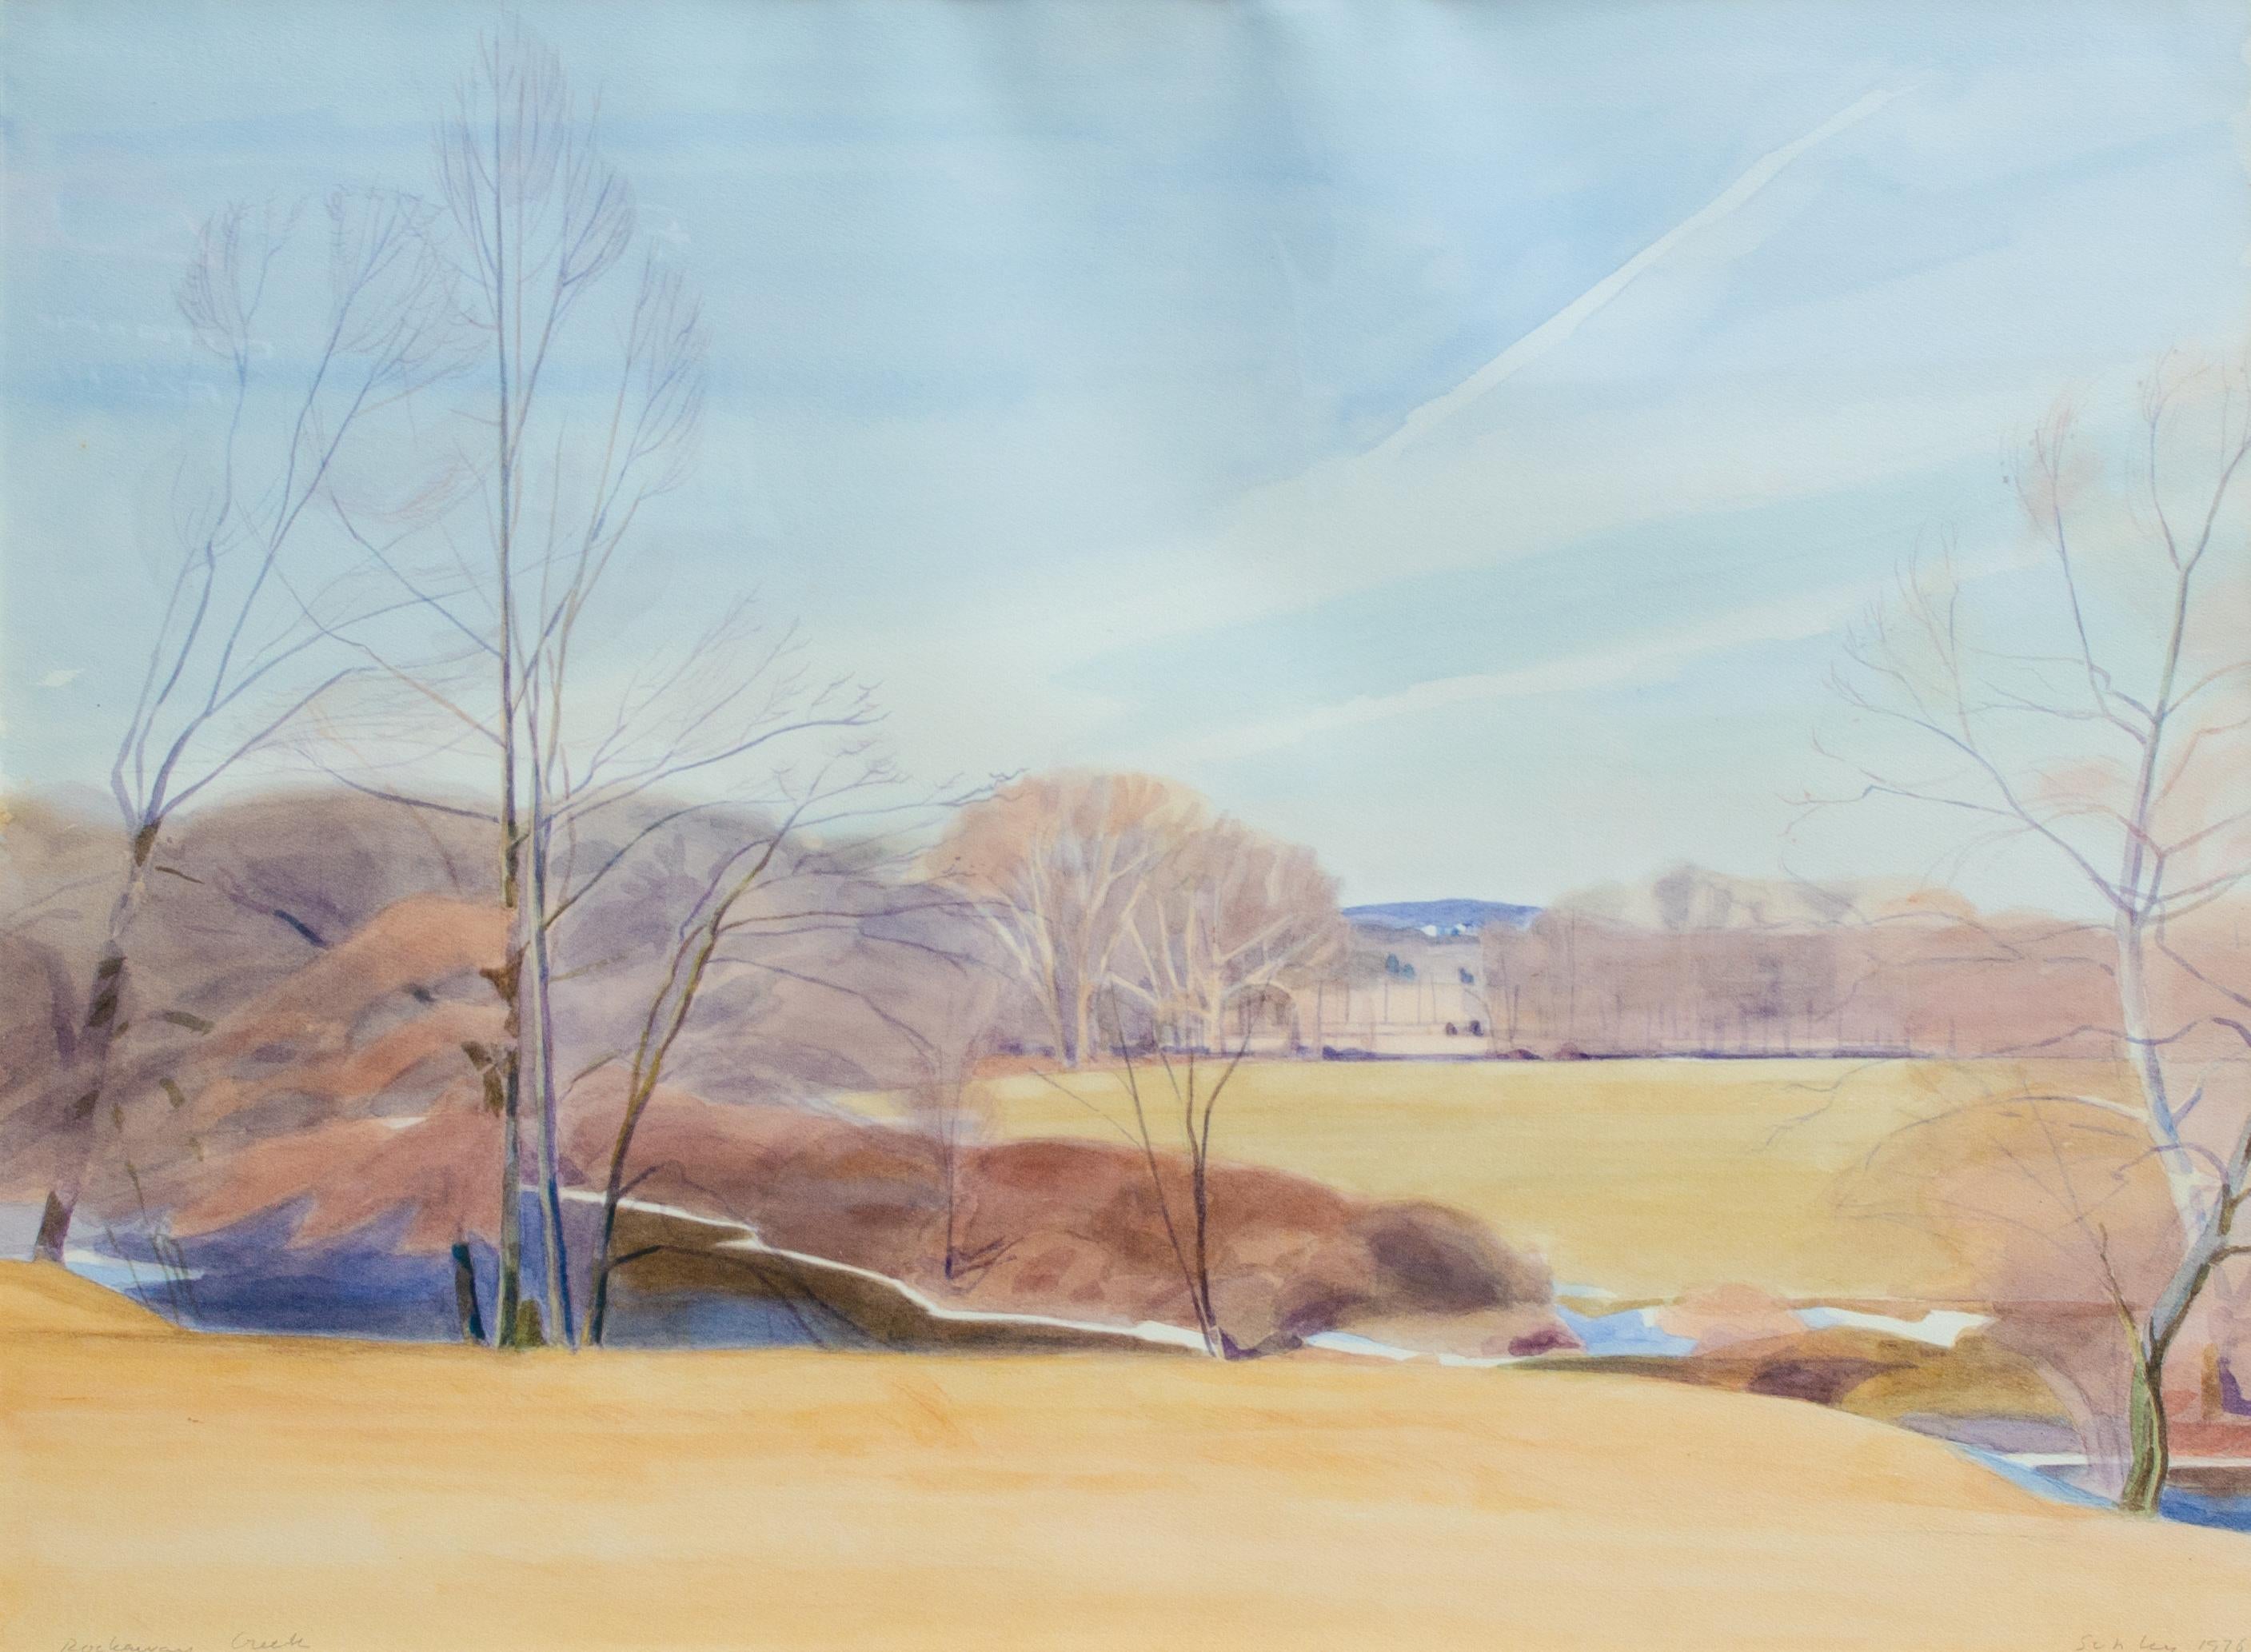 Reeve Schley (American, b. 1936)
Rockaway Creek, Winter, 1976
Watercolor
22 x 30 in.
Framed: 29 1/4 x 37 in.
Signed lower right: Schley 1976
Inscribed lower left: Rockaway creek
Graham Gallery label verso

Reeve Schley was born in New York City in